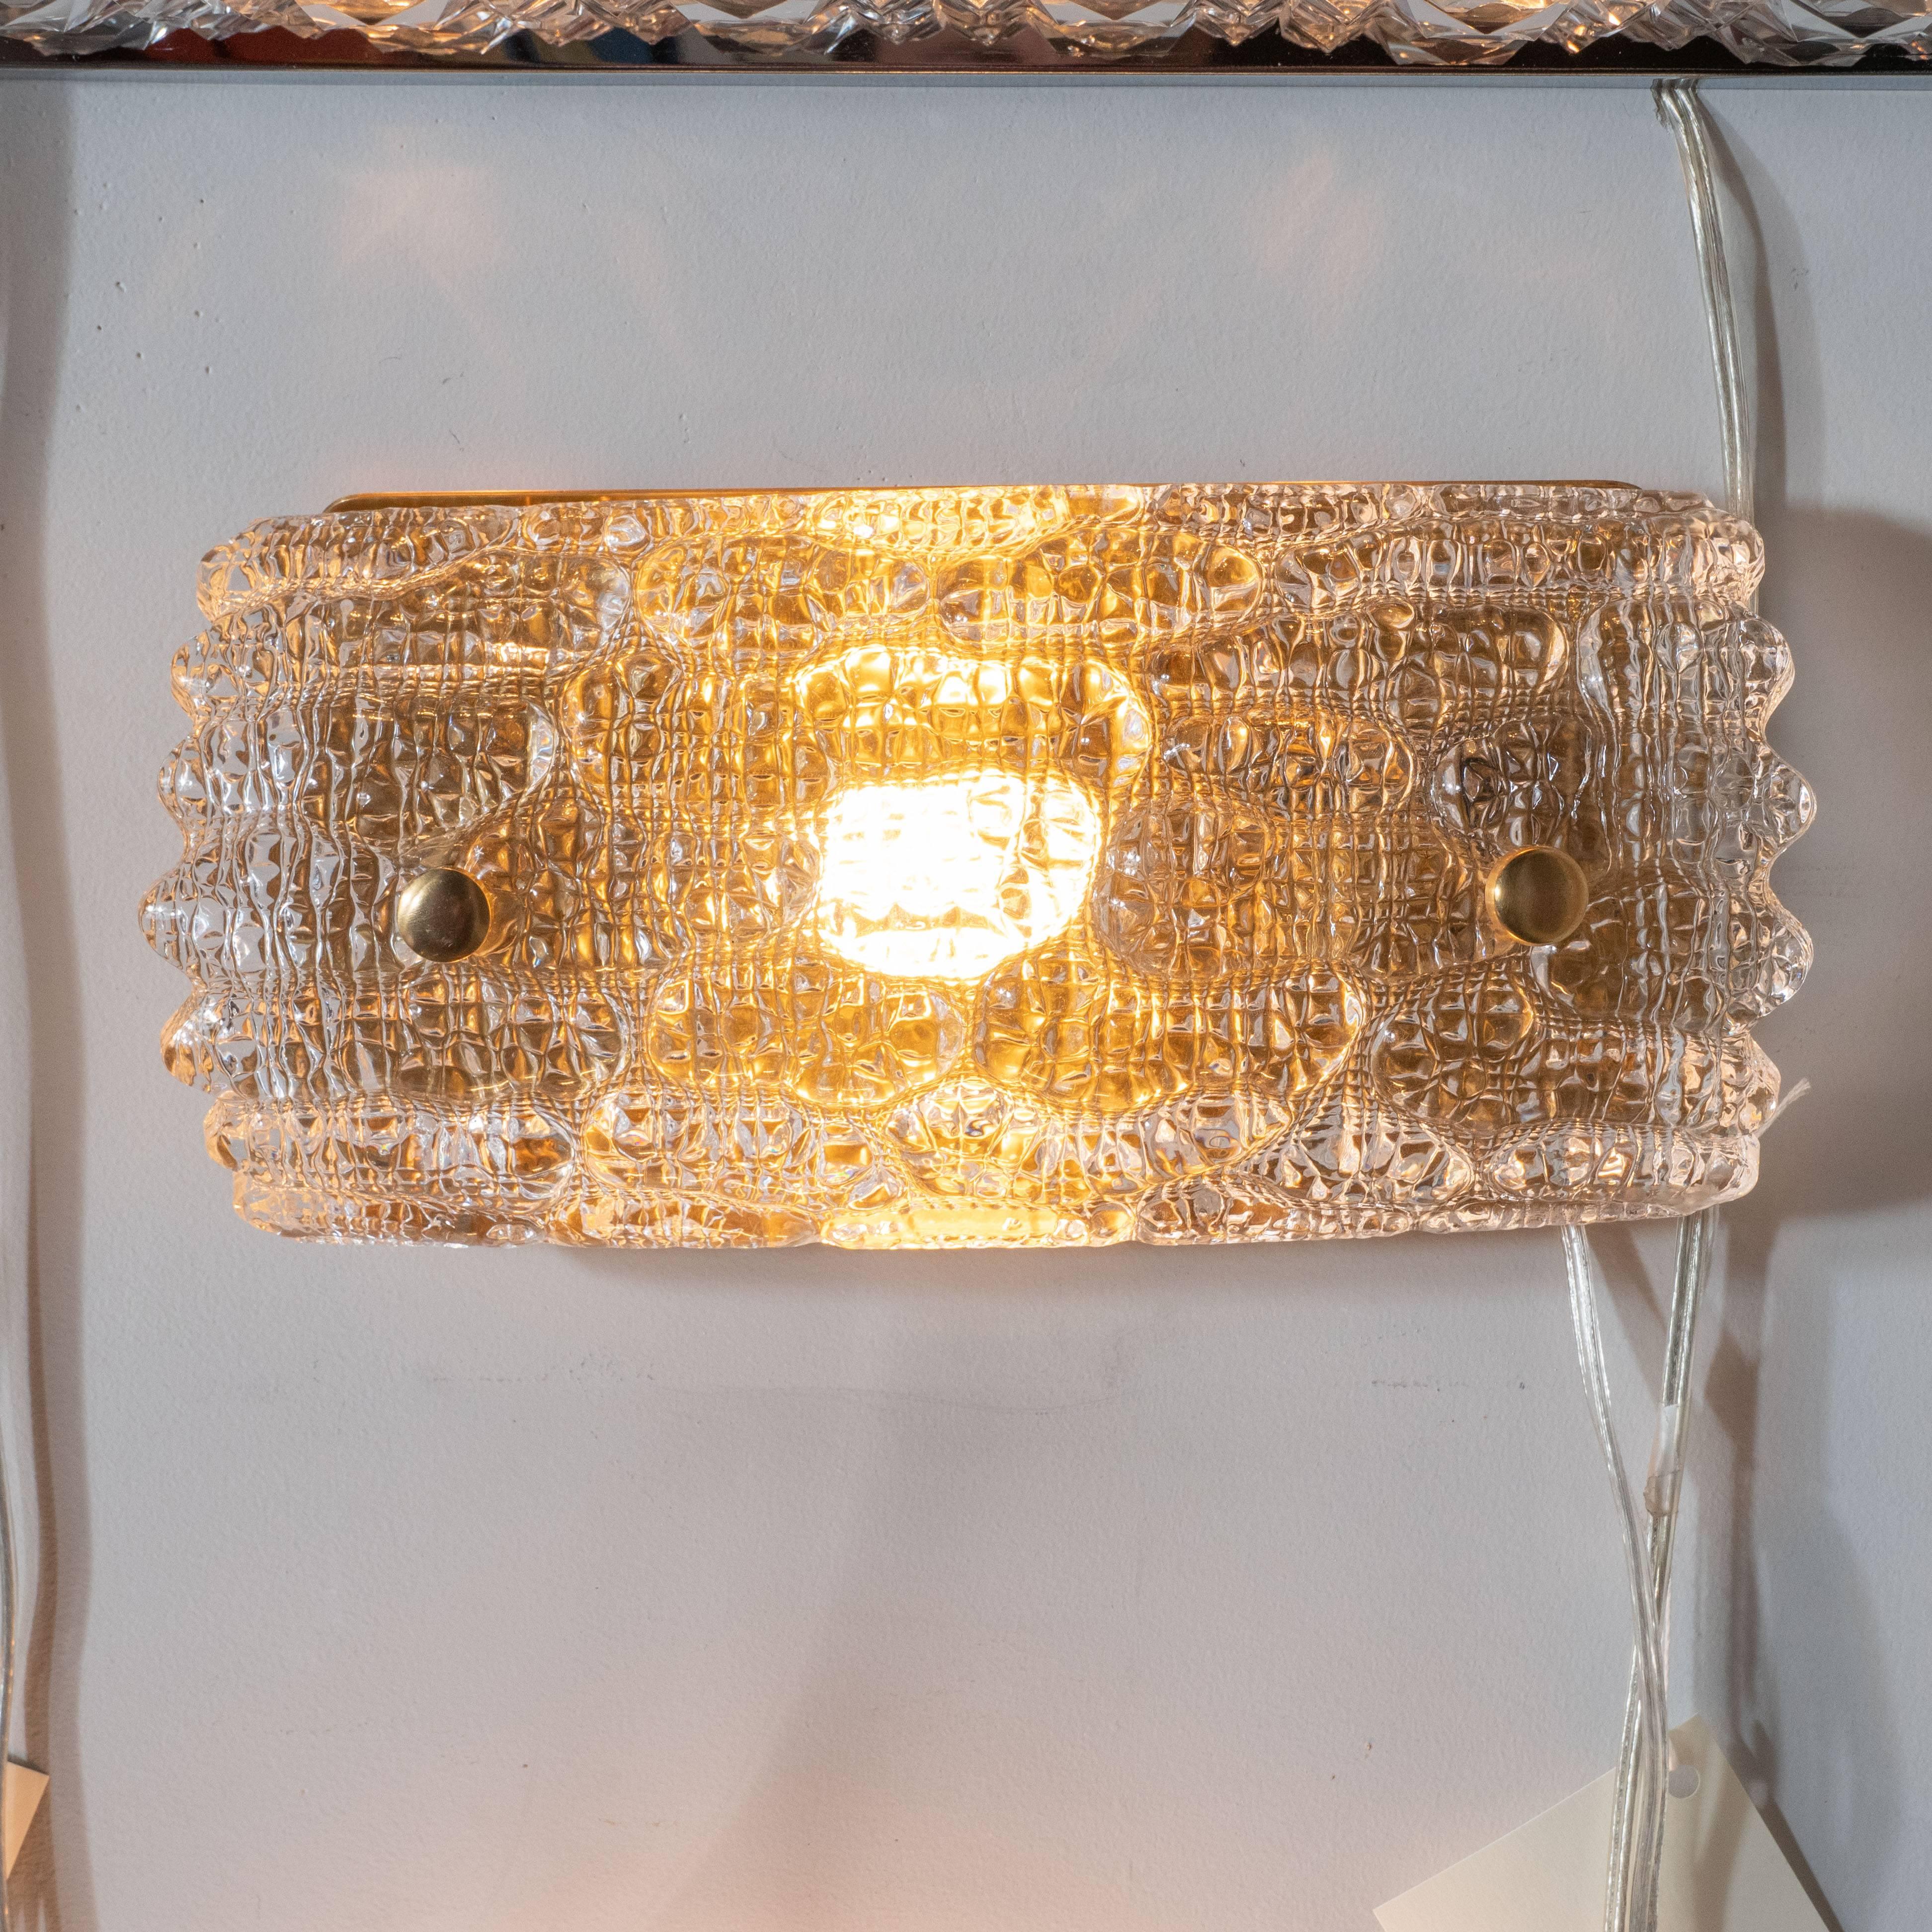 This refined vanity light was realized by the esteemed Mid-Century Modern designer Carl Fagerlund for Orrefors, circa 1960. It offers a vaulted body in handblown translucent glass of a subtle honey hue with a pattern resembling gauffraged crocodile.